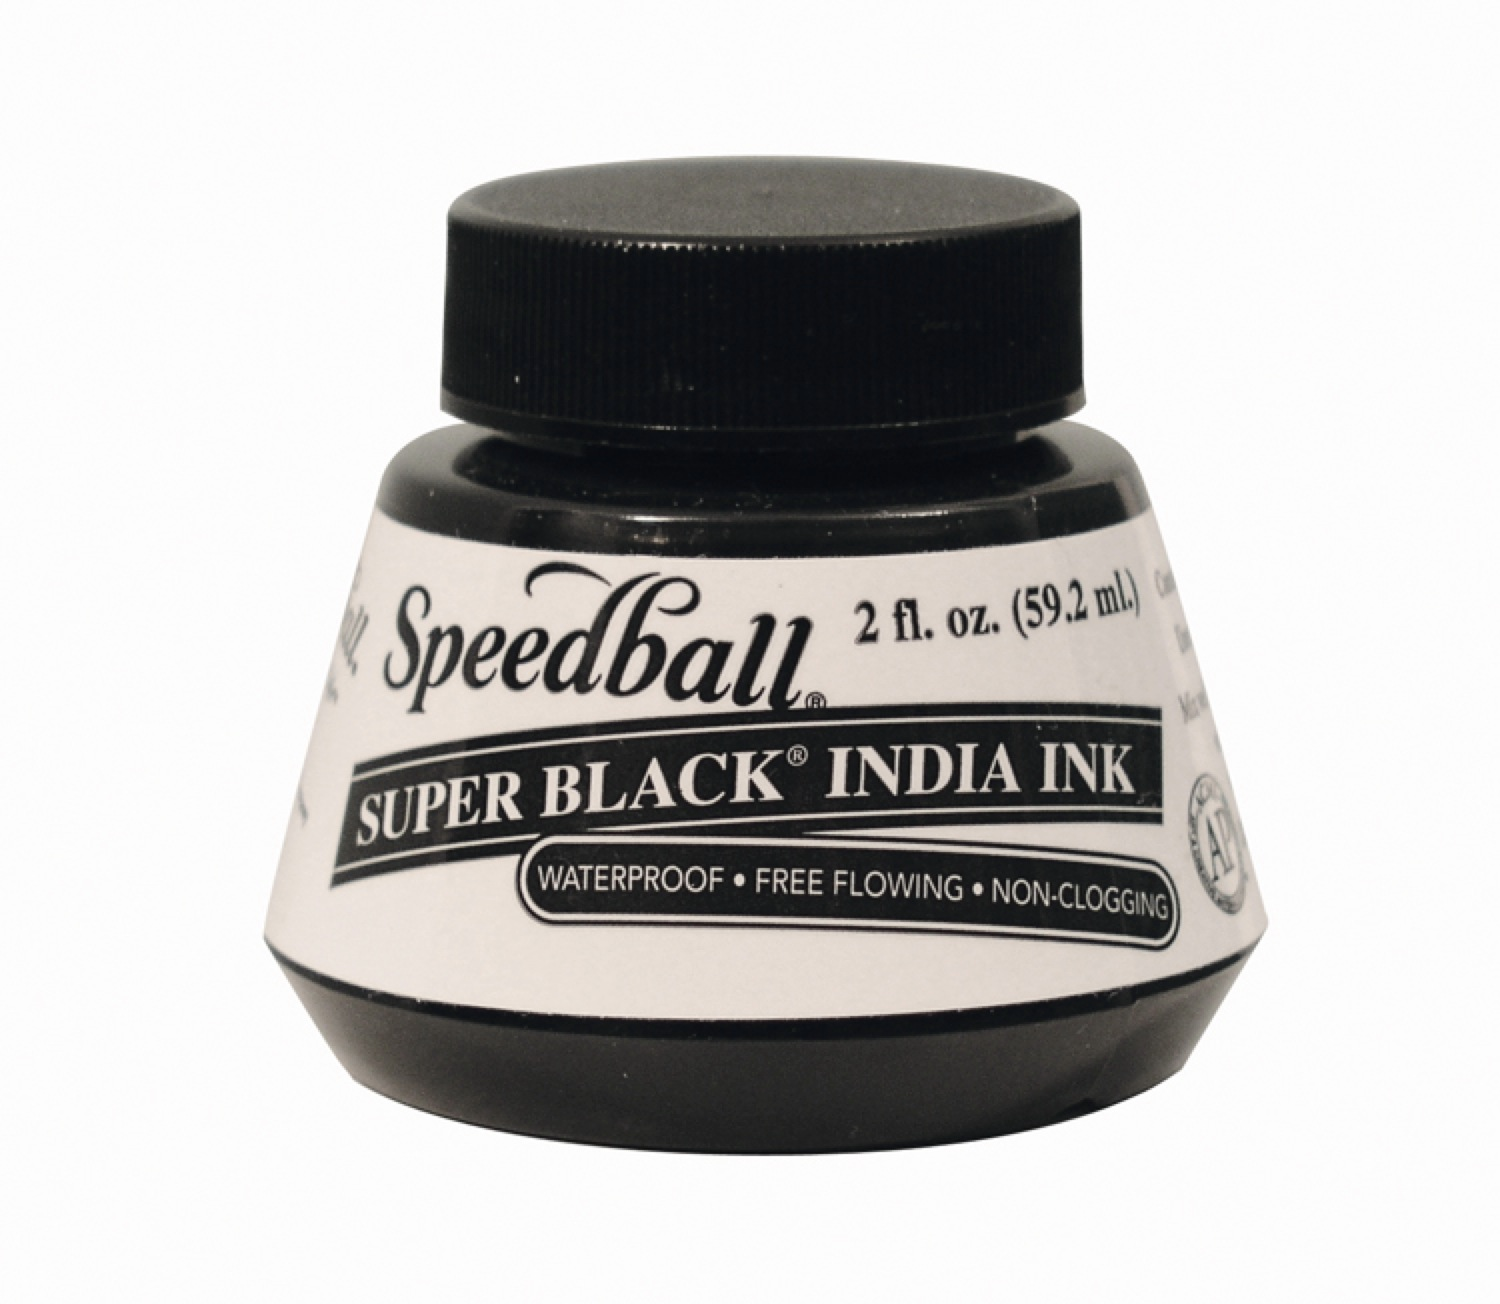 Black India ink is a good choice because it comes out perfectly black 